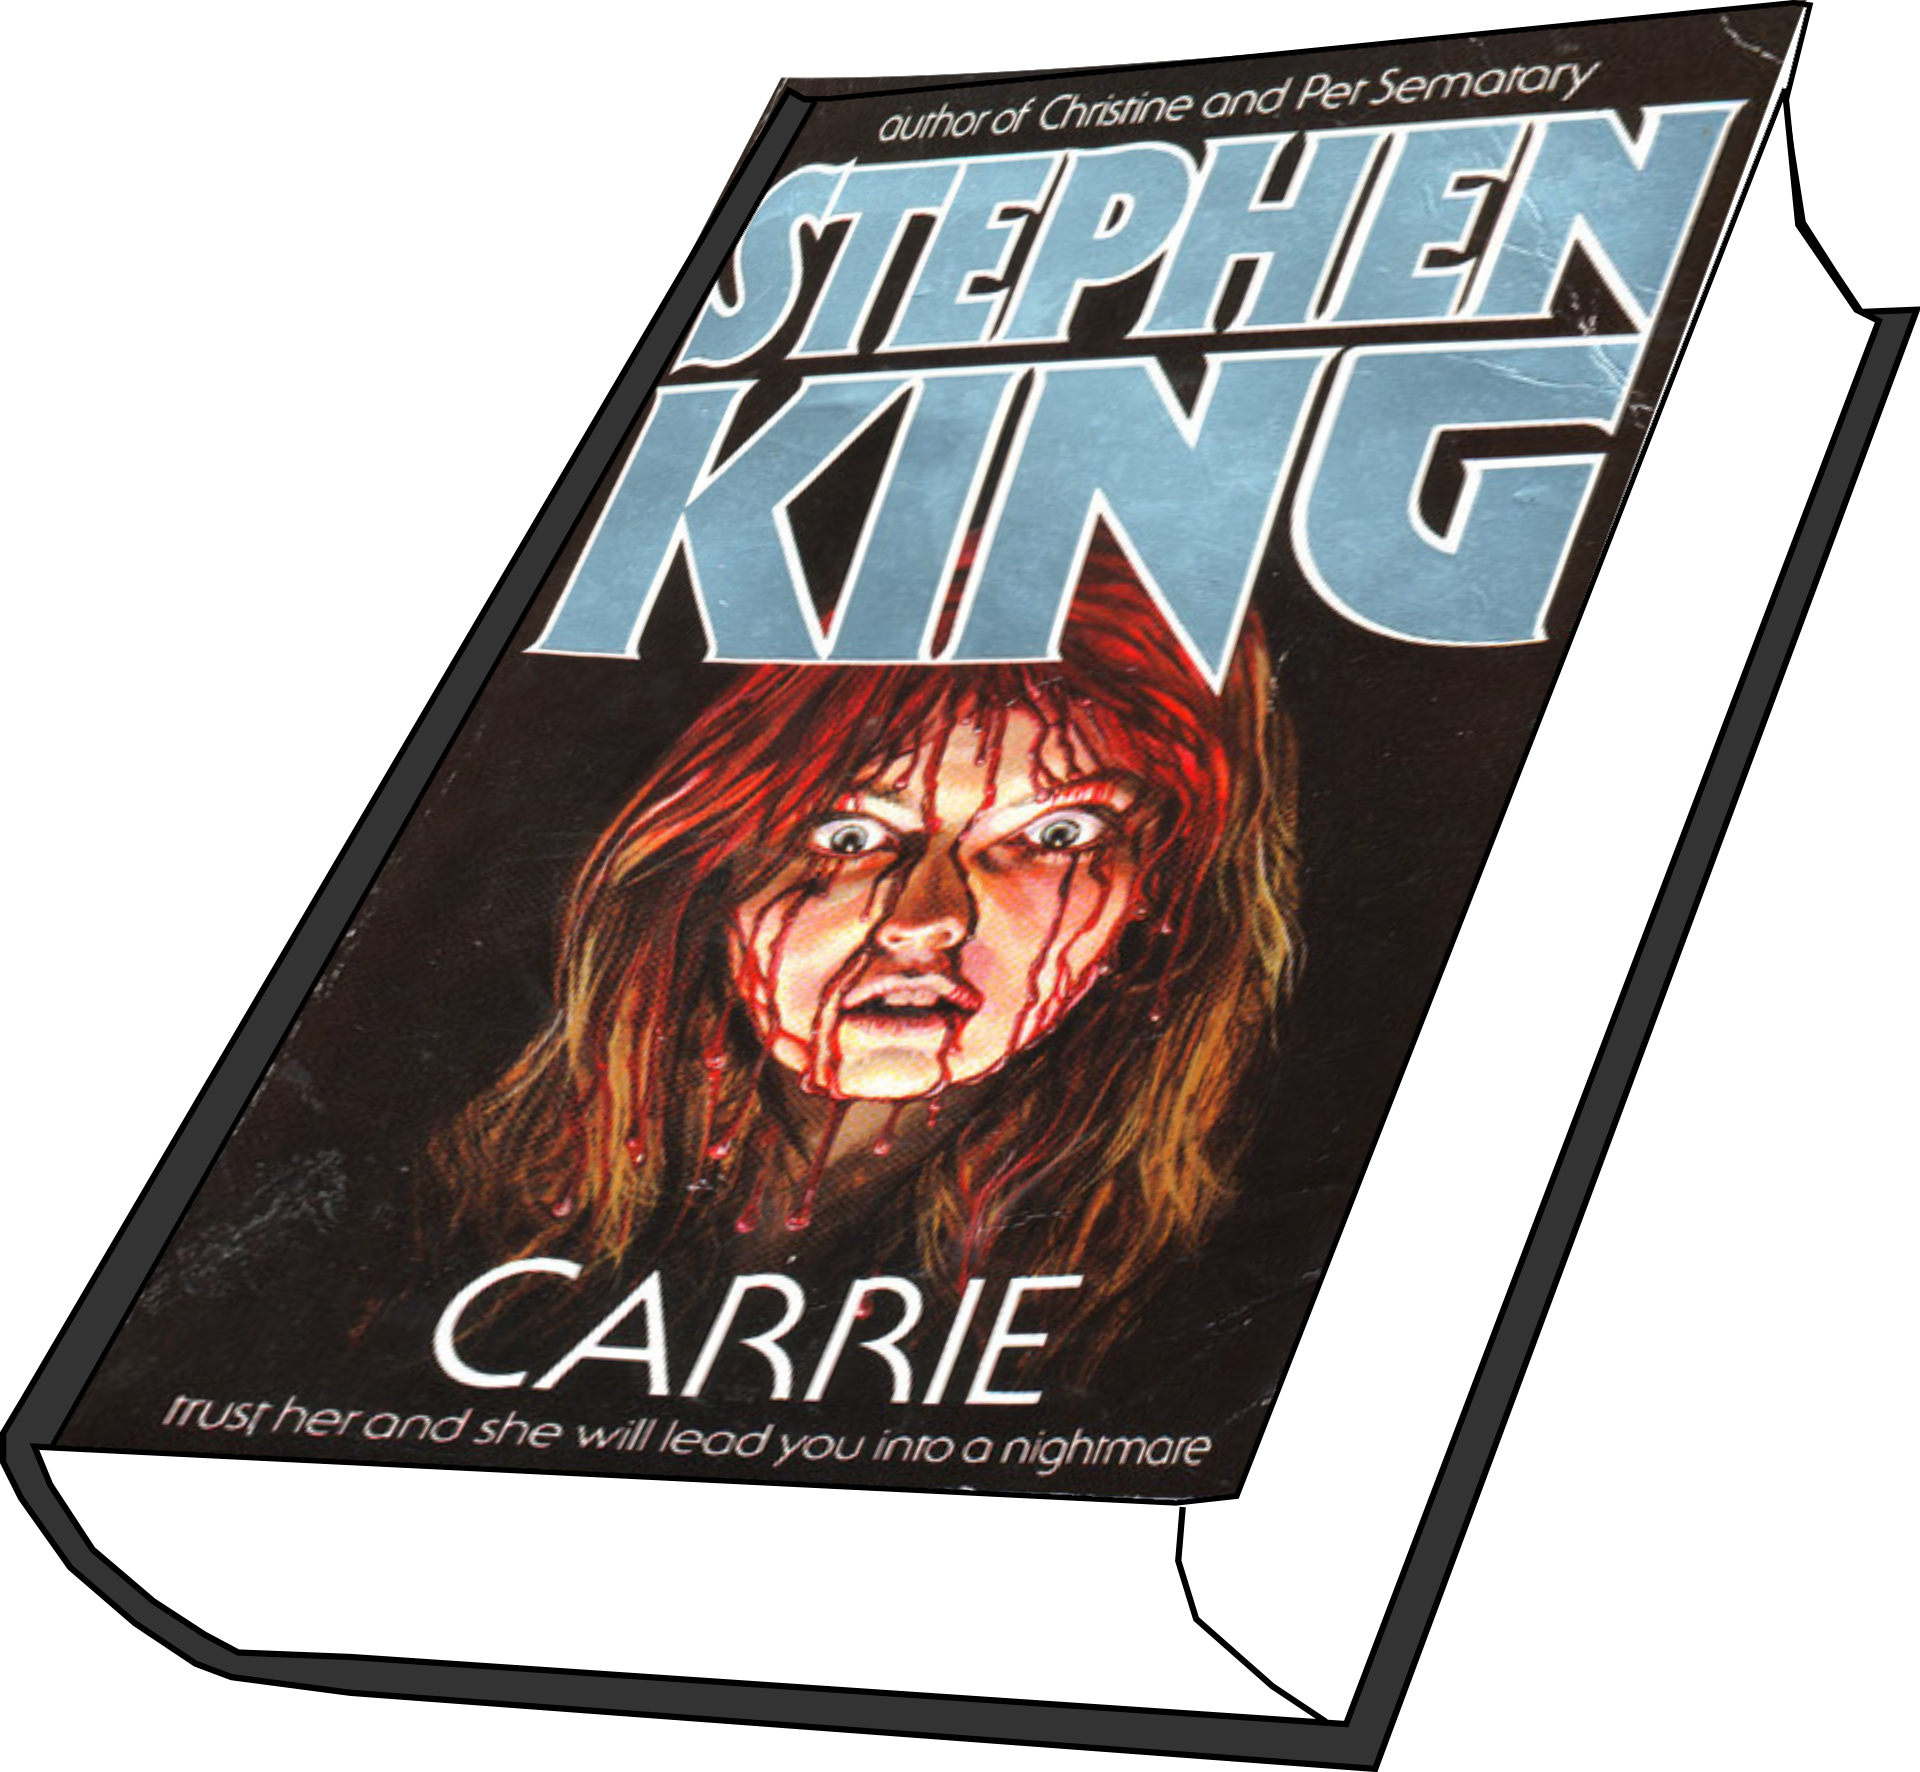 Carrie / Carrie (Spanish Edition) by Stephen King 9789871138999